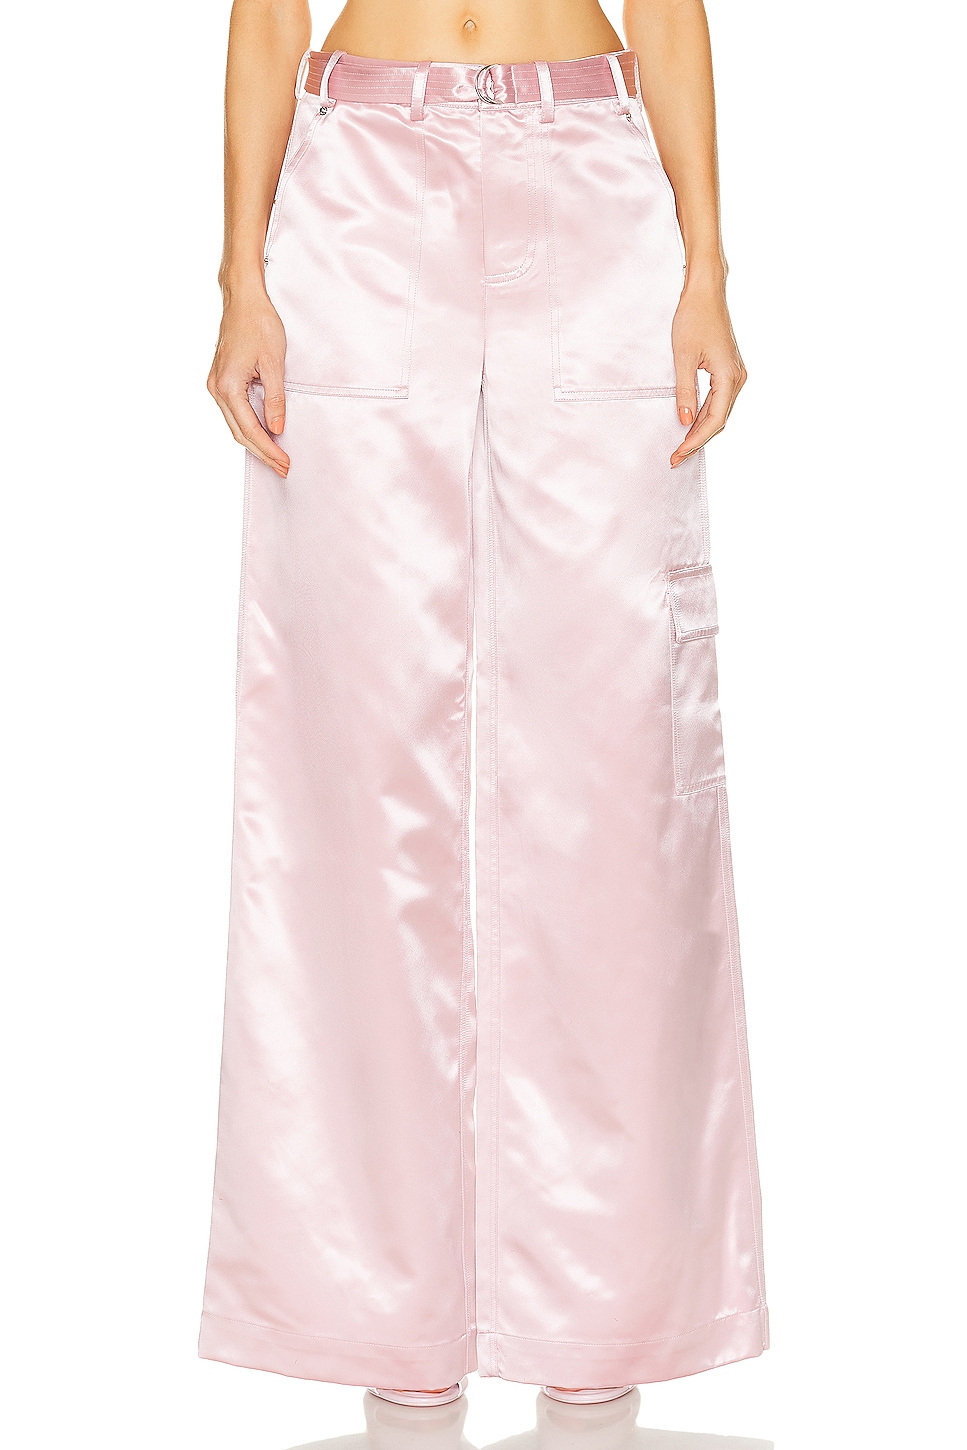 Image 1 of Staud Shay Pant in Cherry Blossom